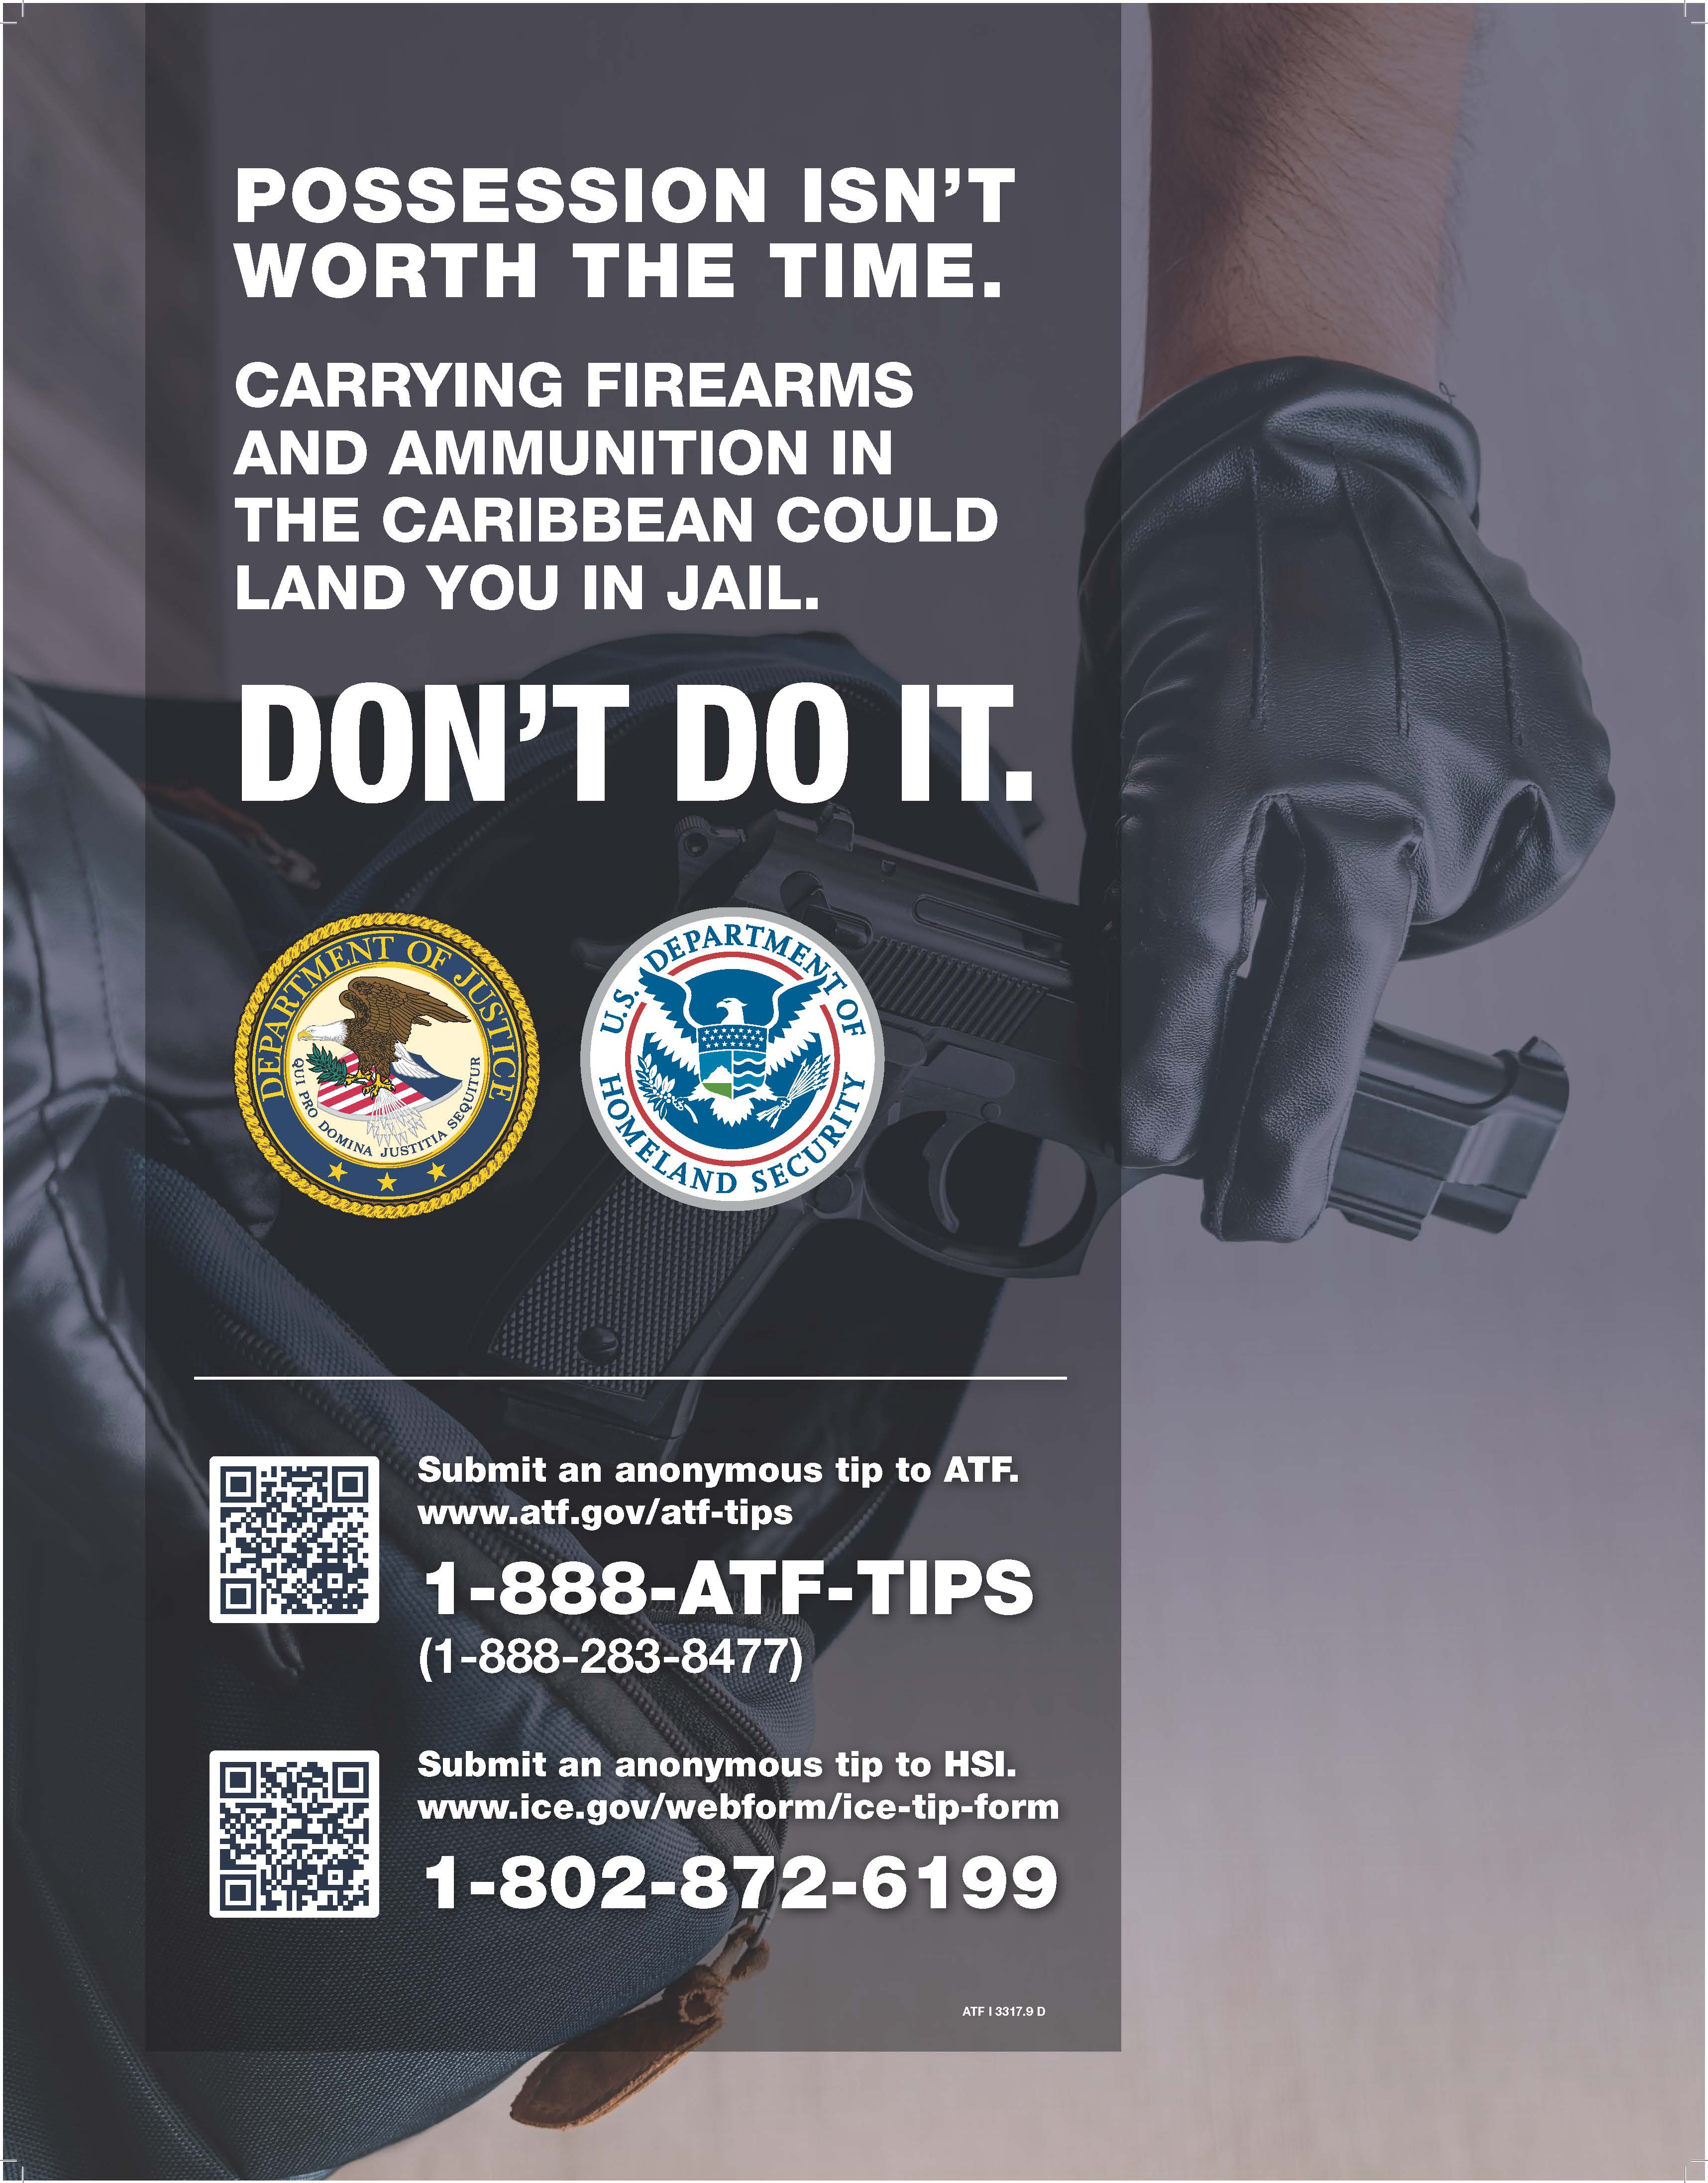 ATF I 3317.9 D CARICOM Anti-Firearms Trafficking Campaign Poster: gloved hands holding a firearm